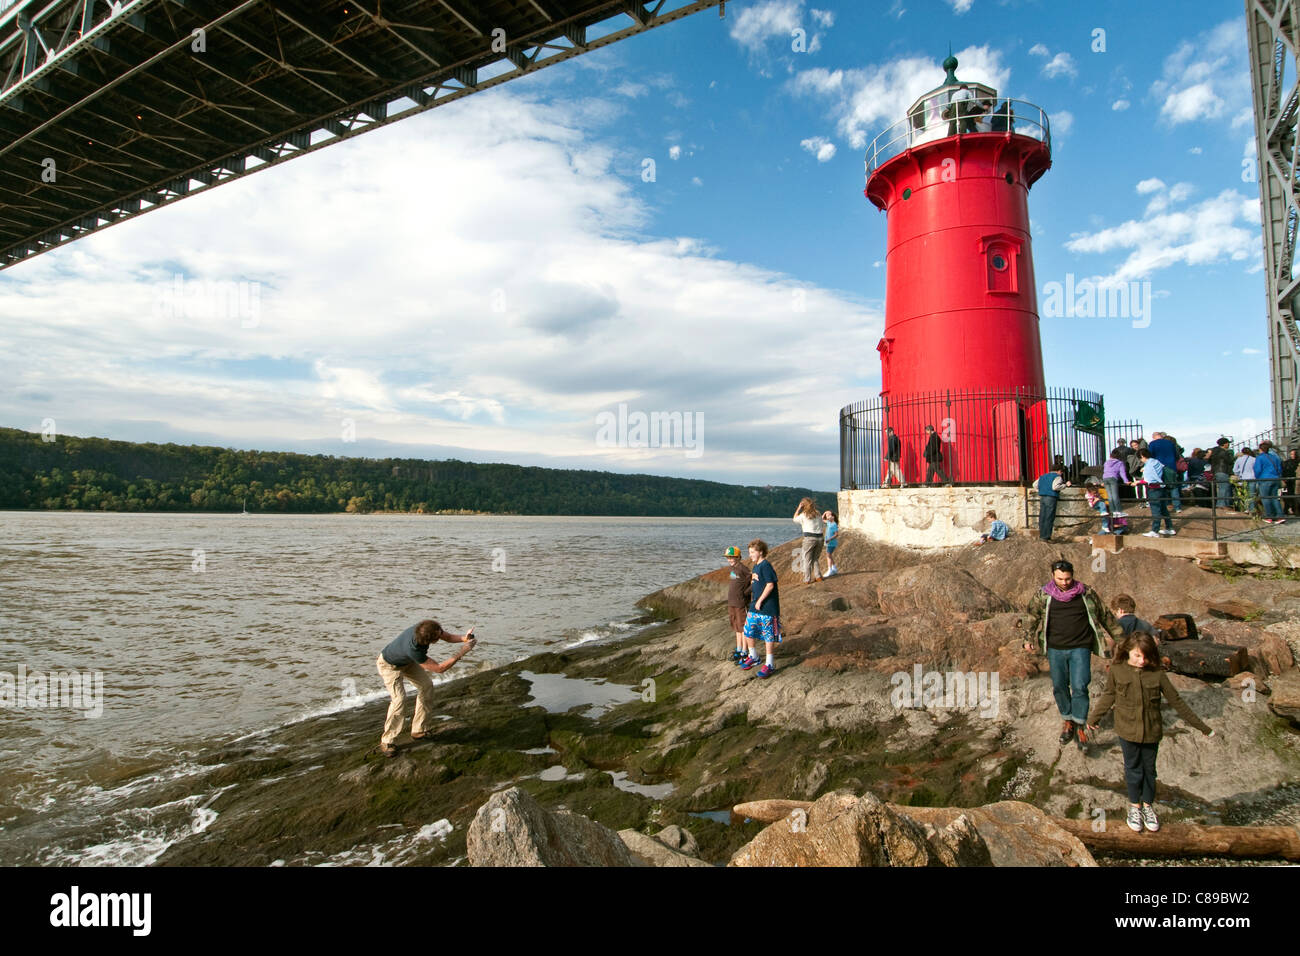 The Little Red Lighthouse, officially Jeffrey's Hook Lighthouse, at the base of the George Washington Bridge in New York City. Stock Photo